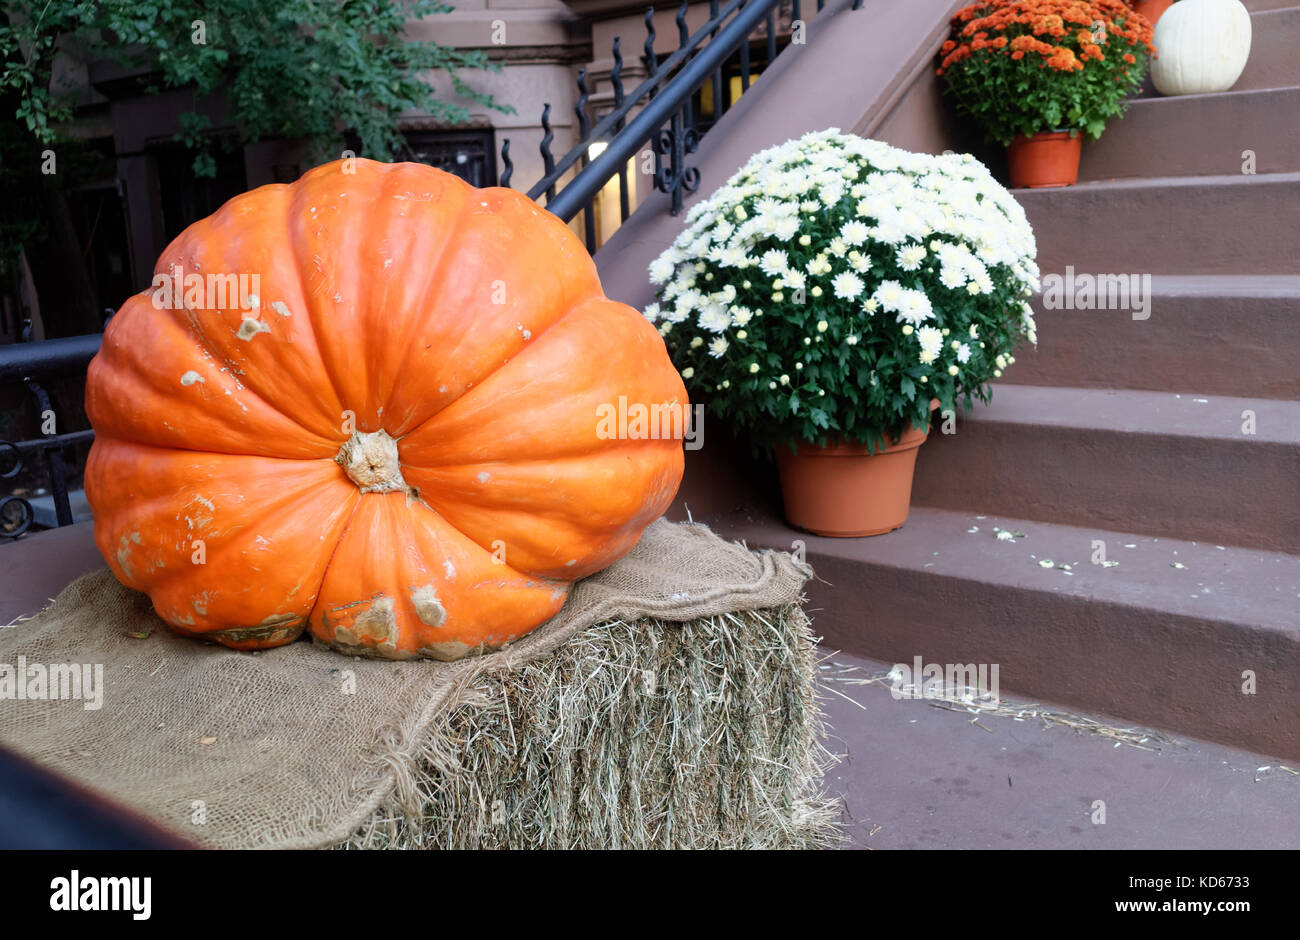 Large squashy pumpkin on a bale of hay with potted chrysanthemums on a Brooklyn brownstone stoop. Stock Photo